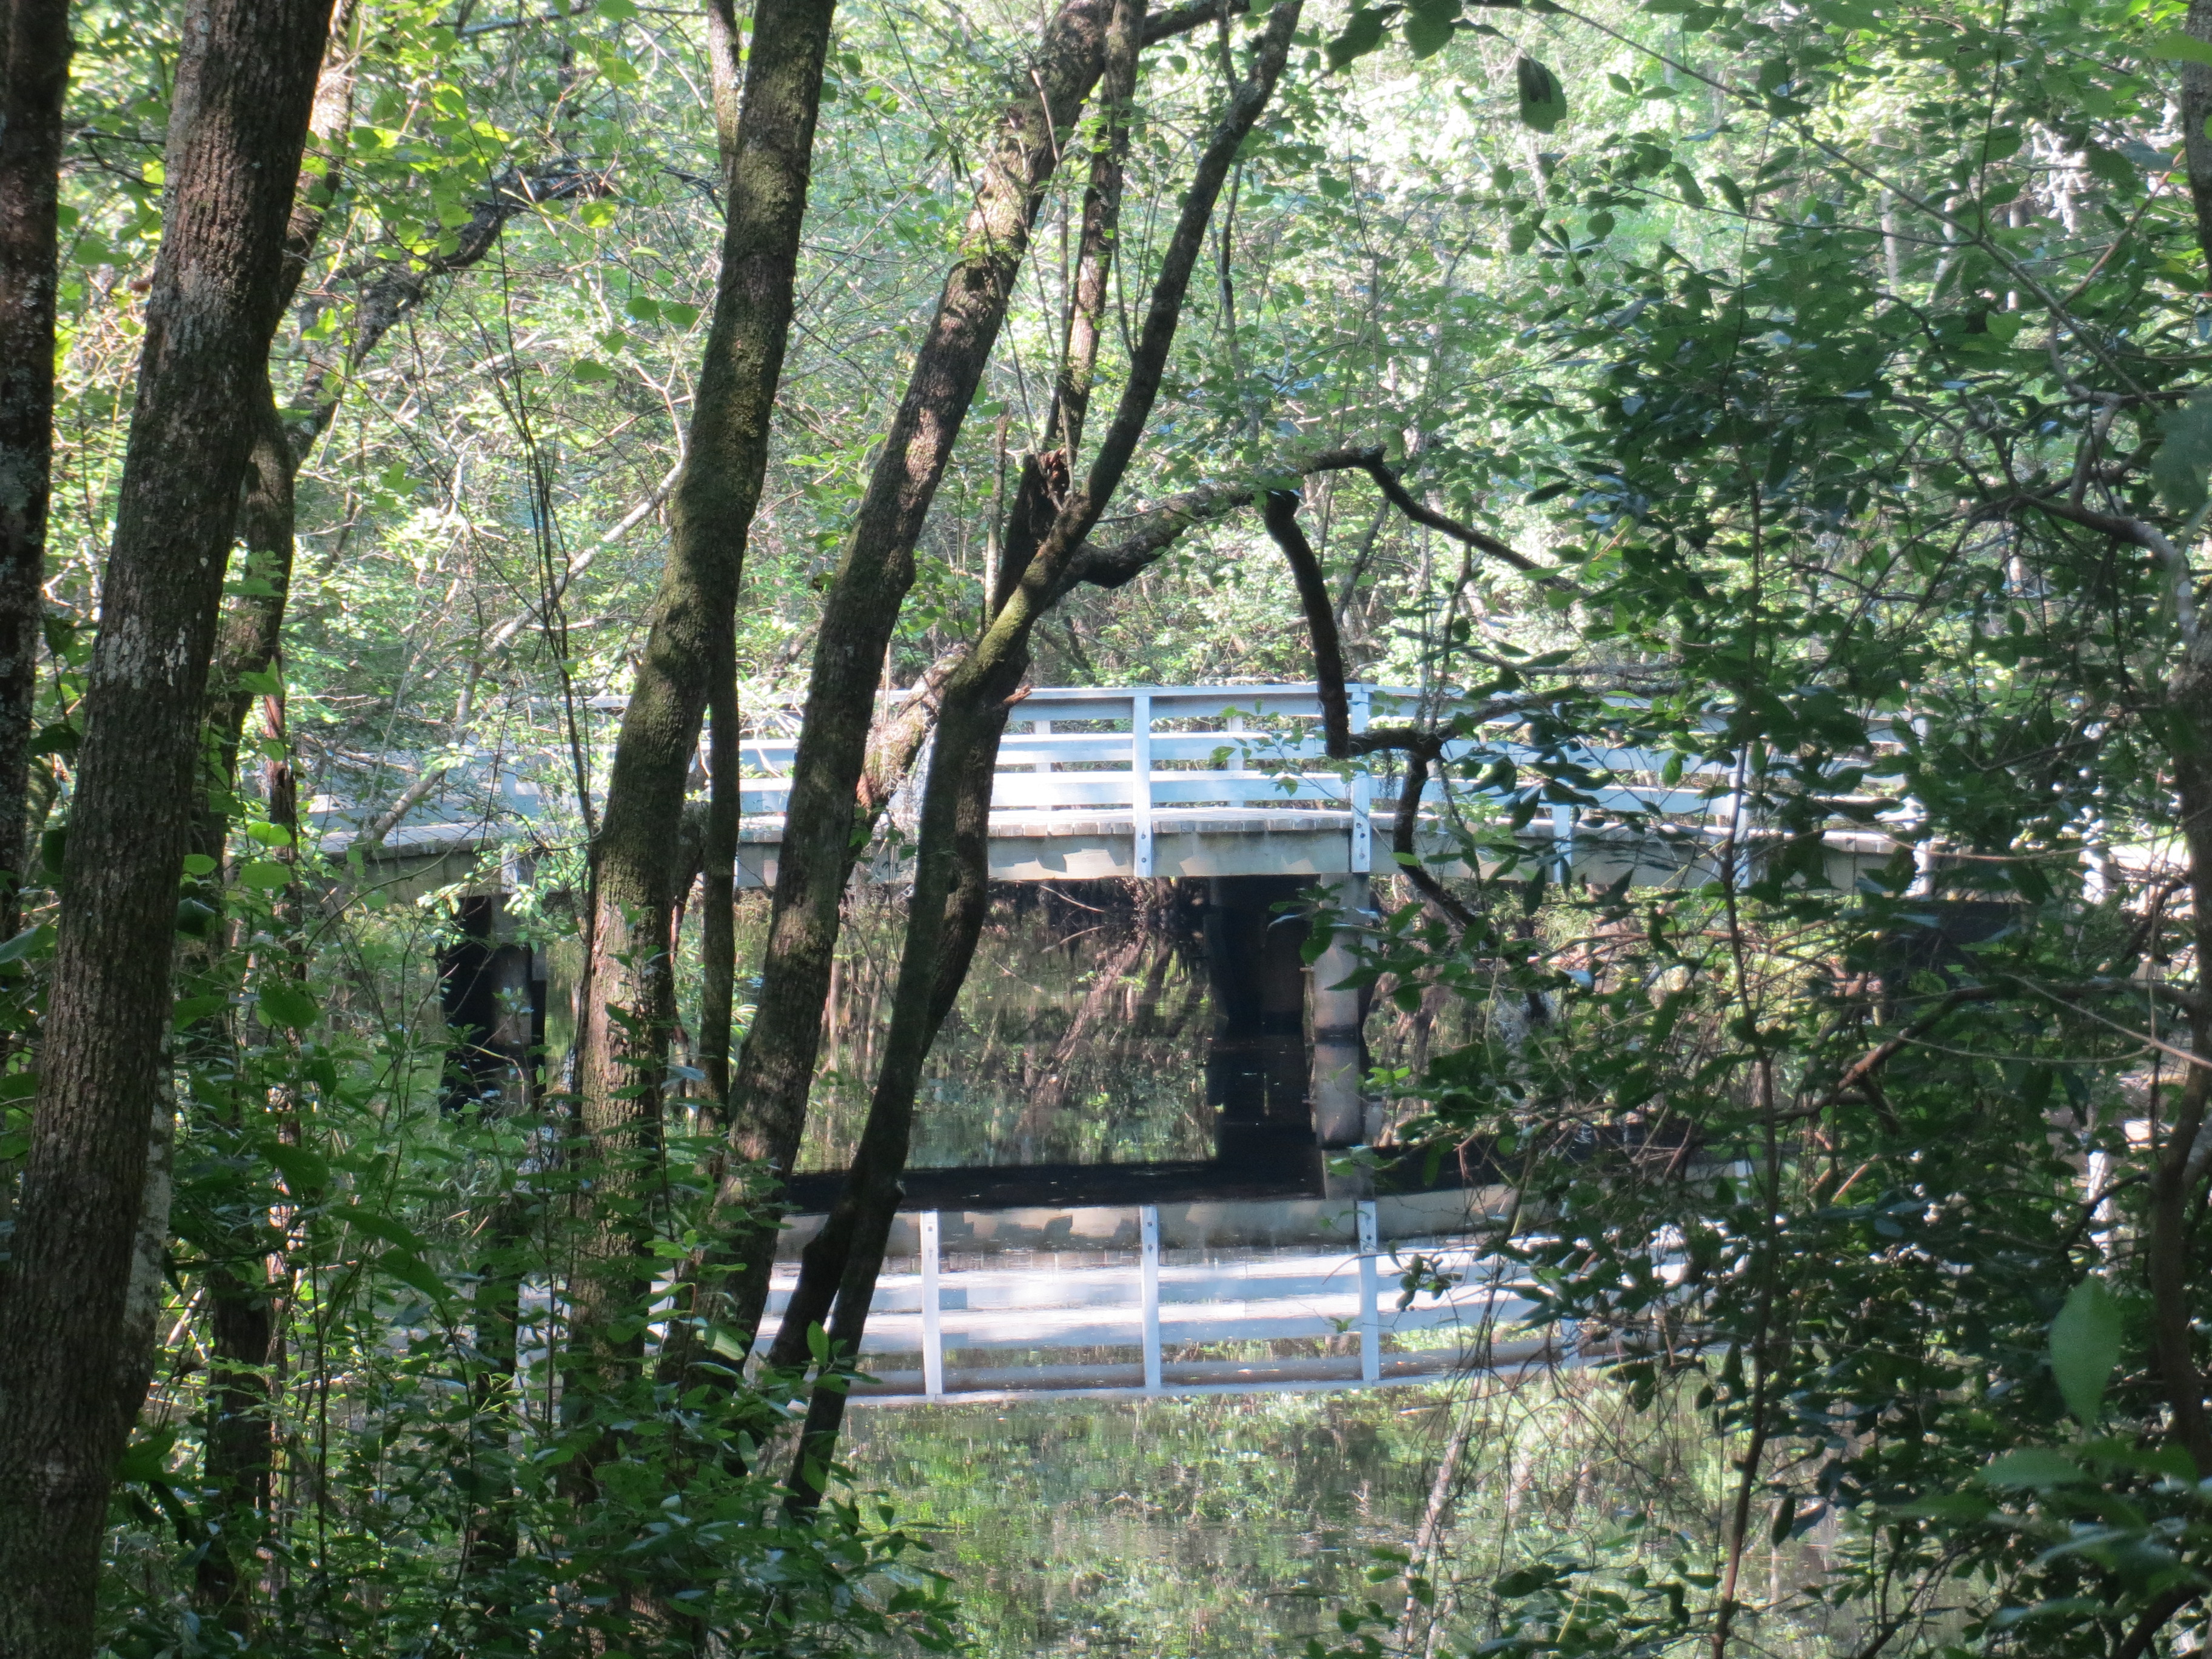 This modern bridge marks the location where the battle took place. Visitors can learn about the battle in the site's visitor center.